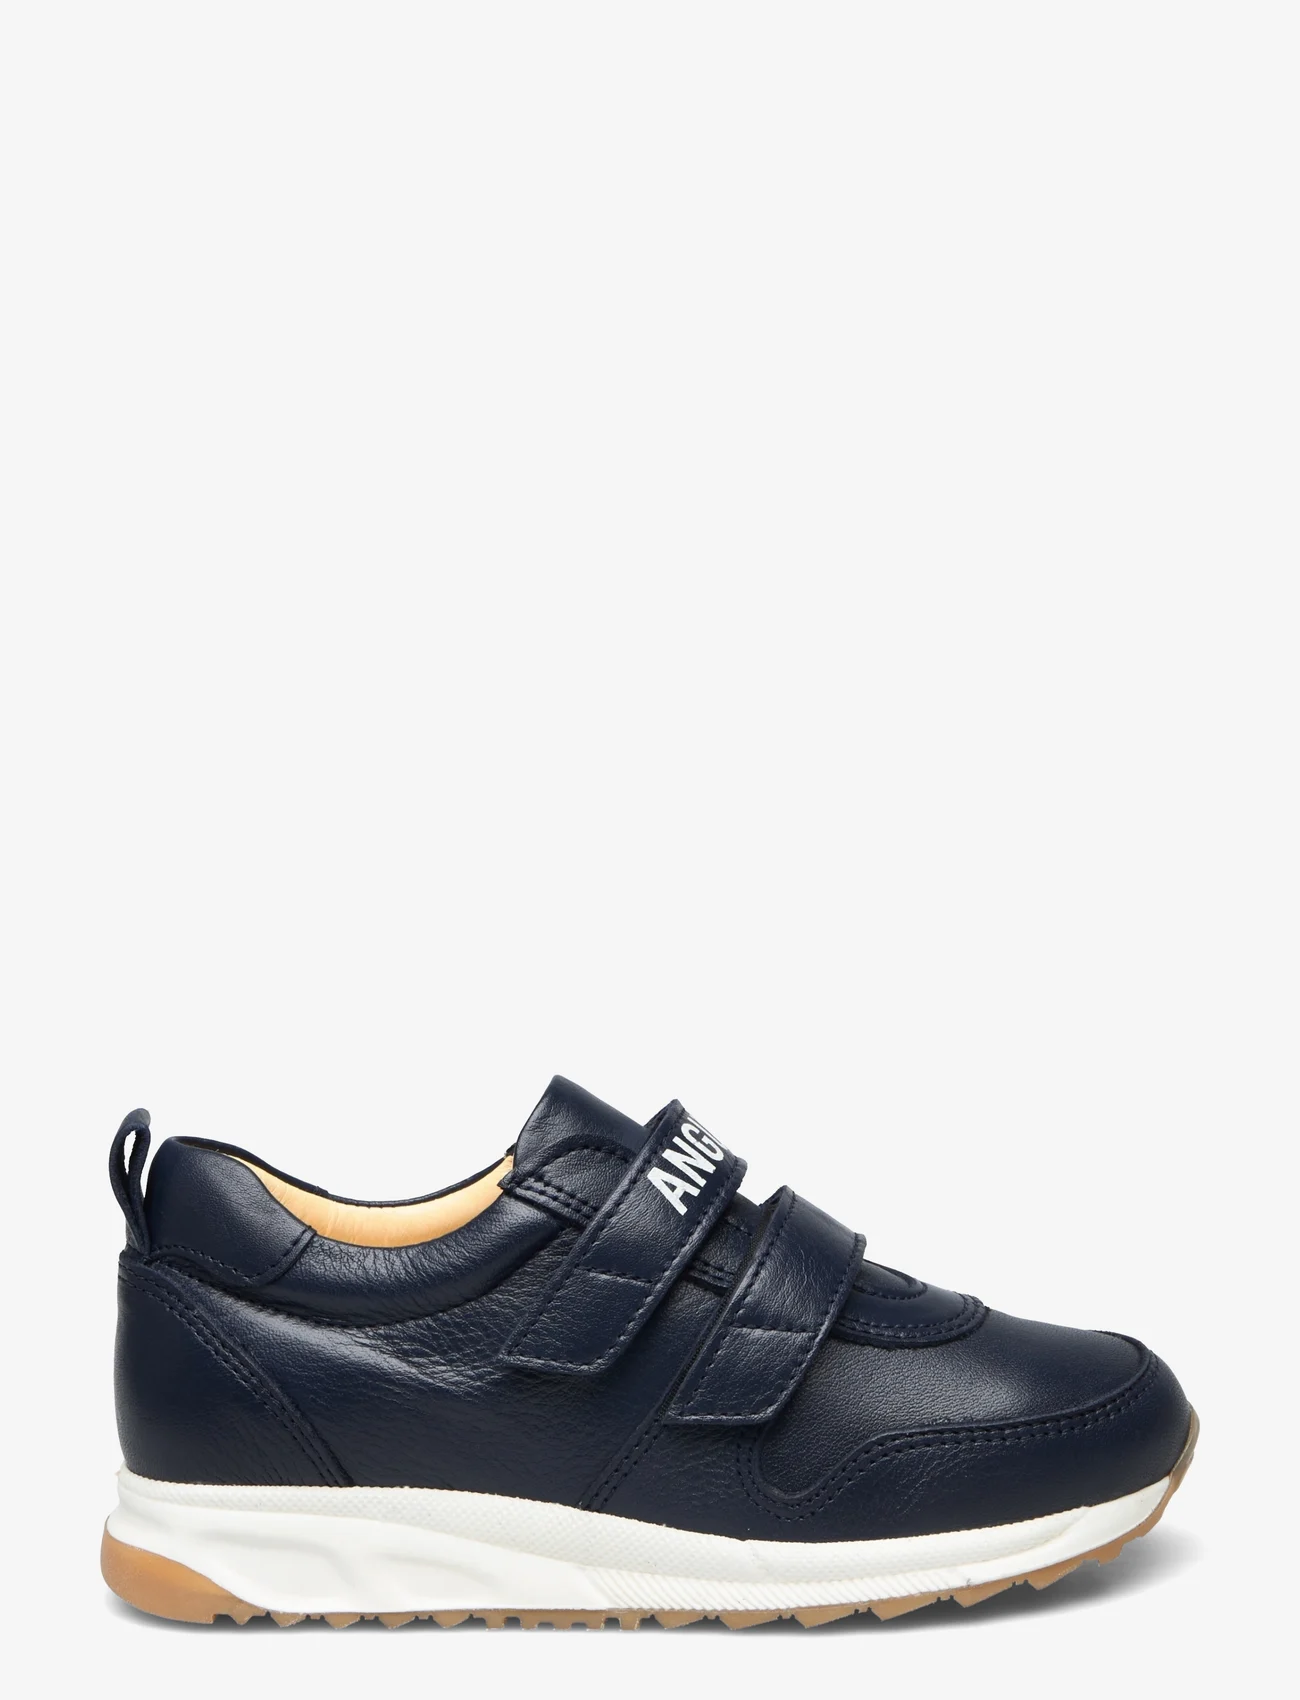 ANGULUS - Shoes - flat - with velcro - gode sommertilbud - 2585 navy - 1